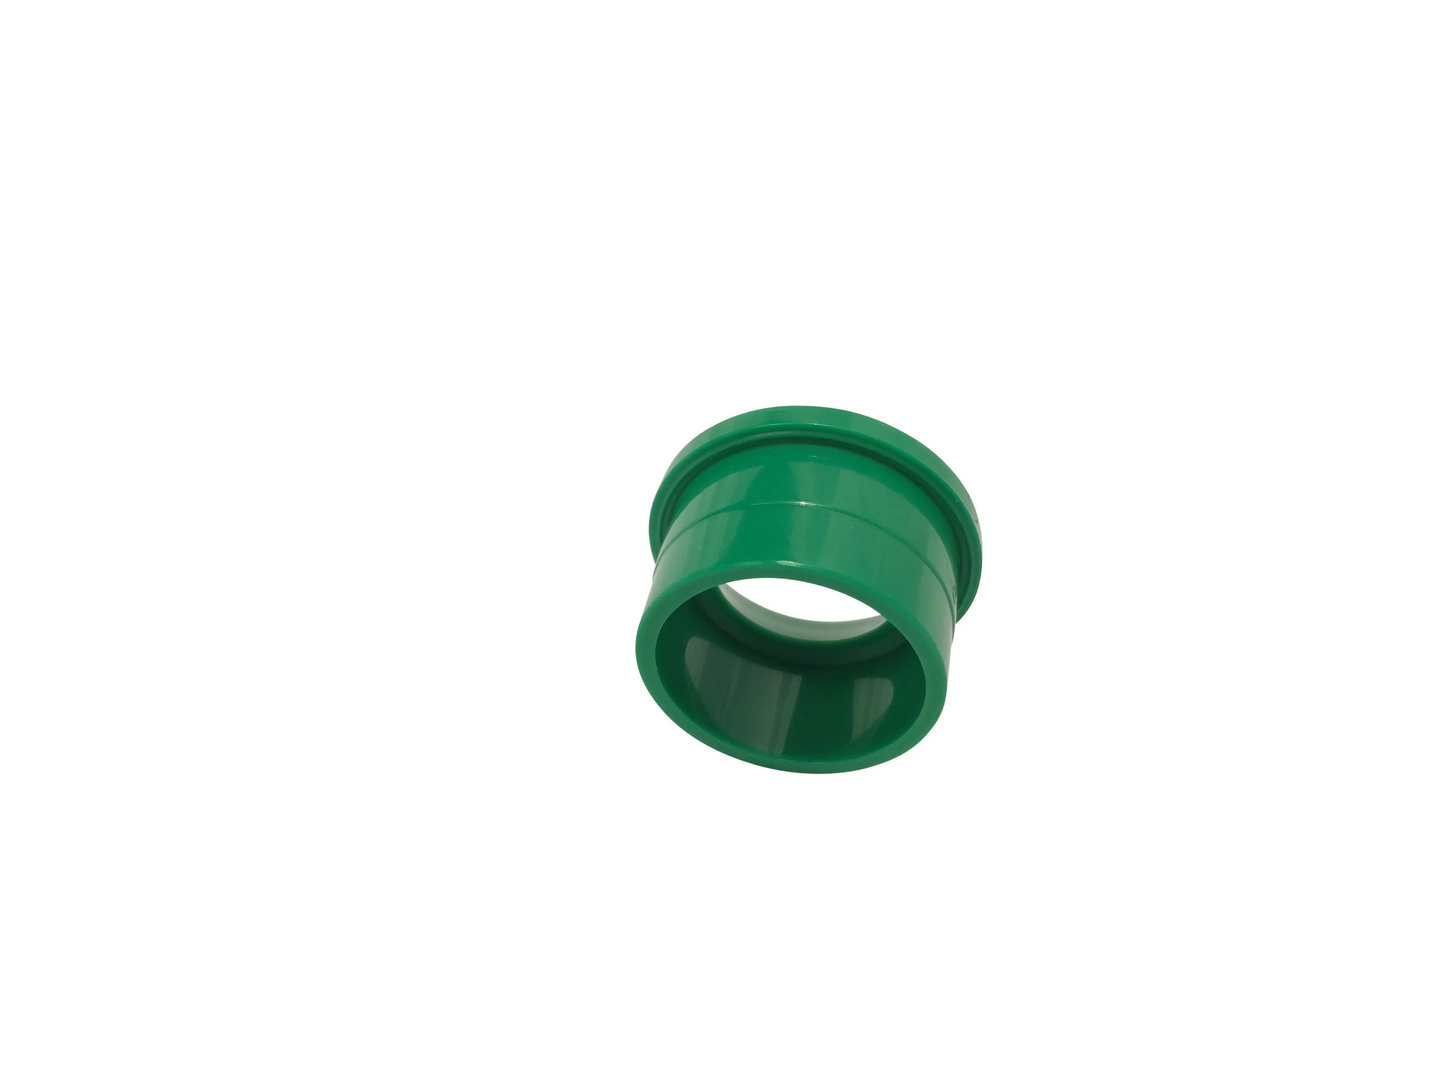 NDS CA 600 - Solvent Weld Compression Adapter, Green